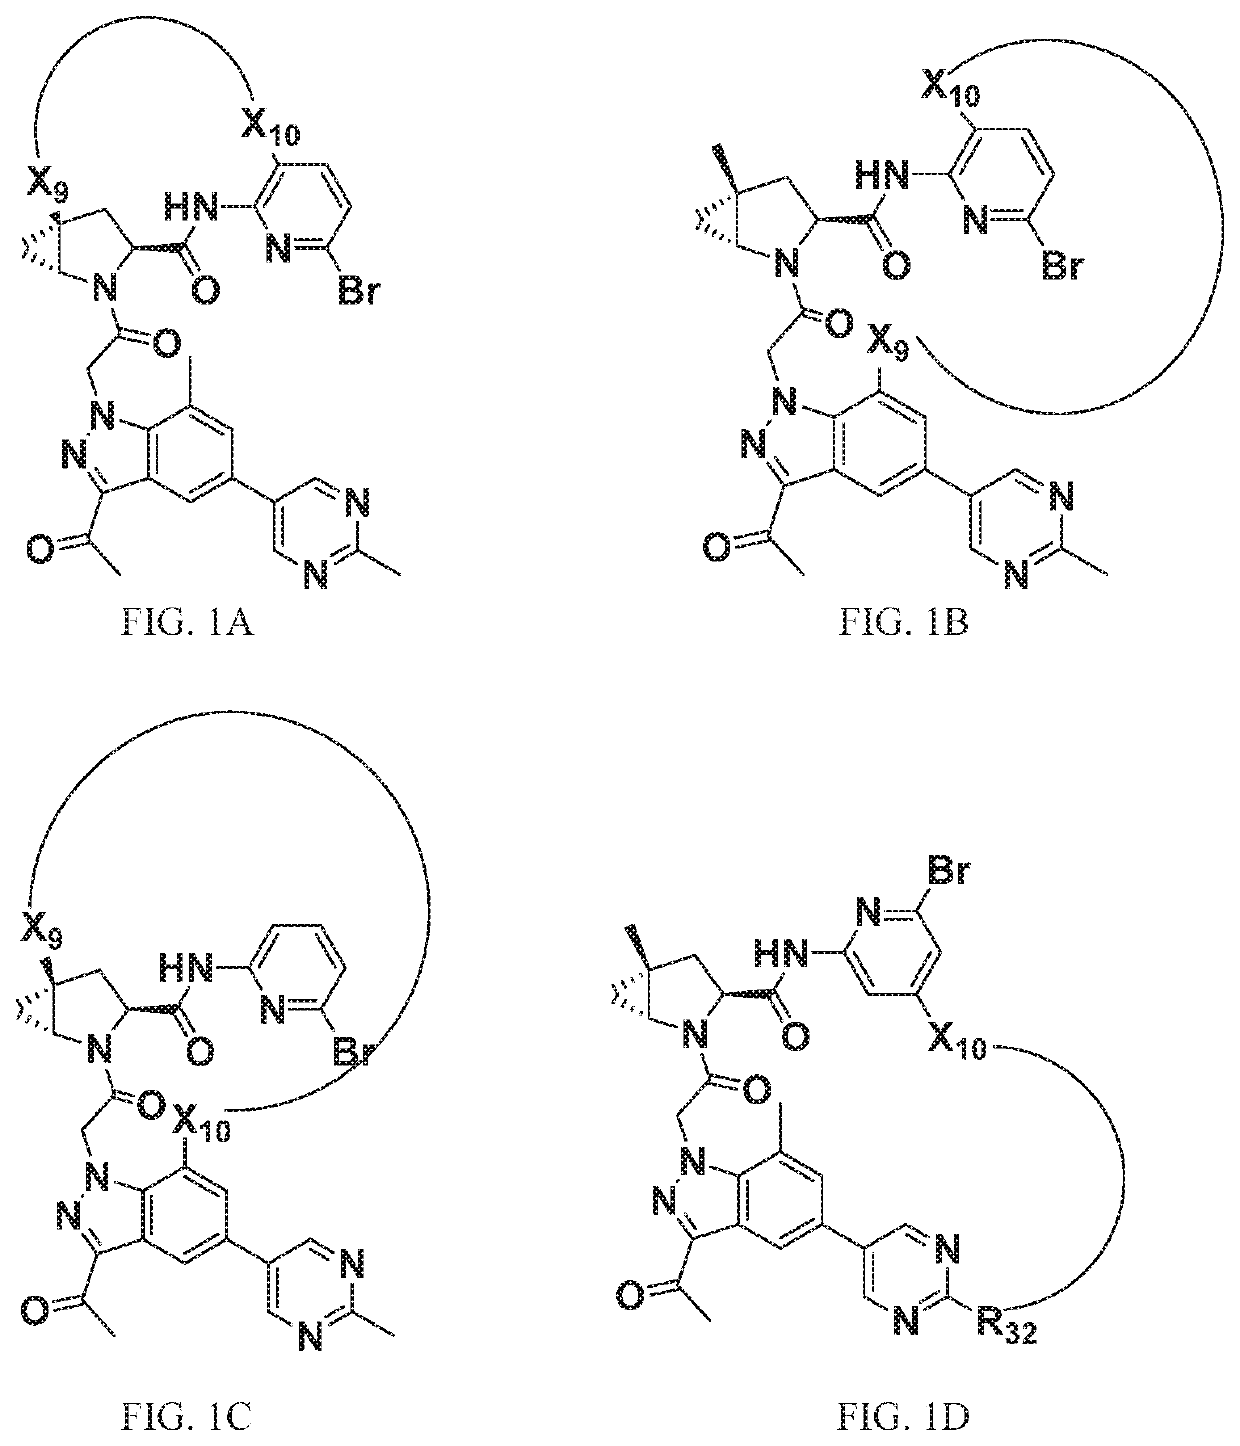 Macrocyclic compounds for treatment of medical disorders